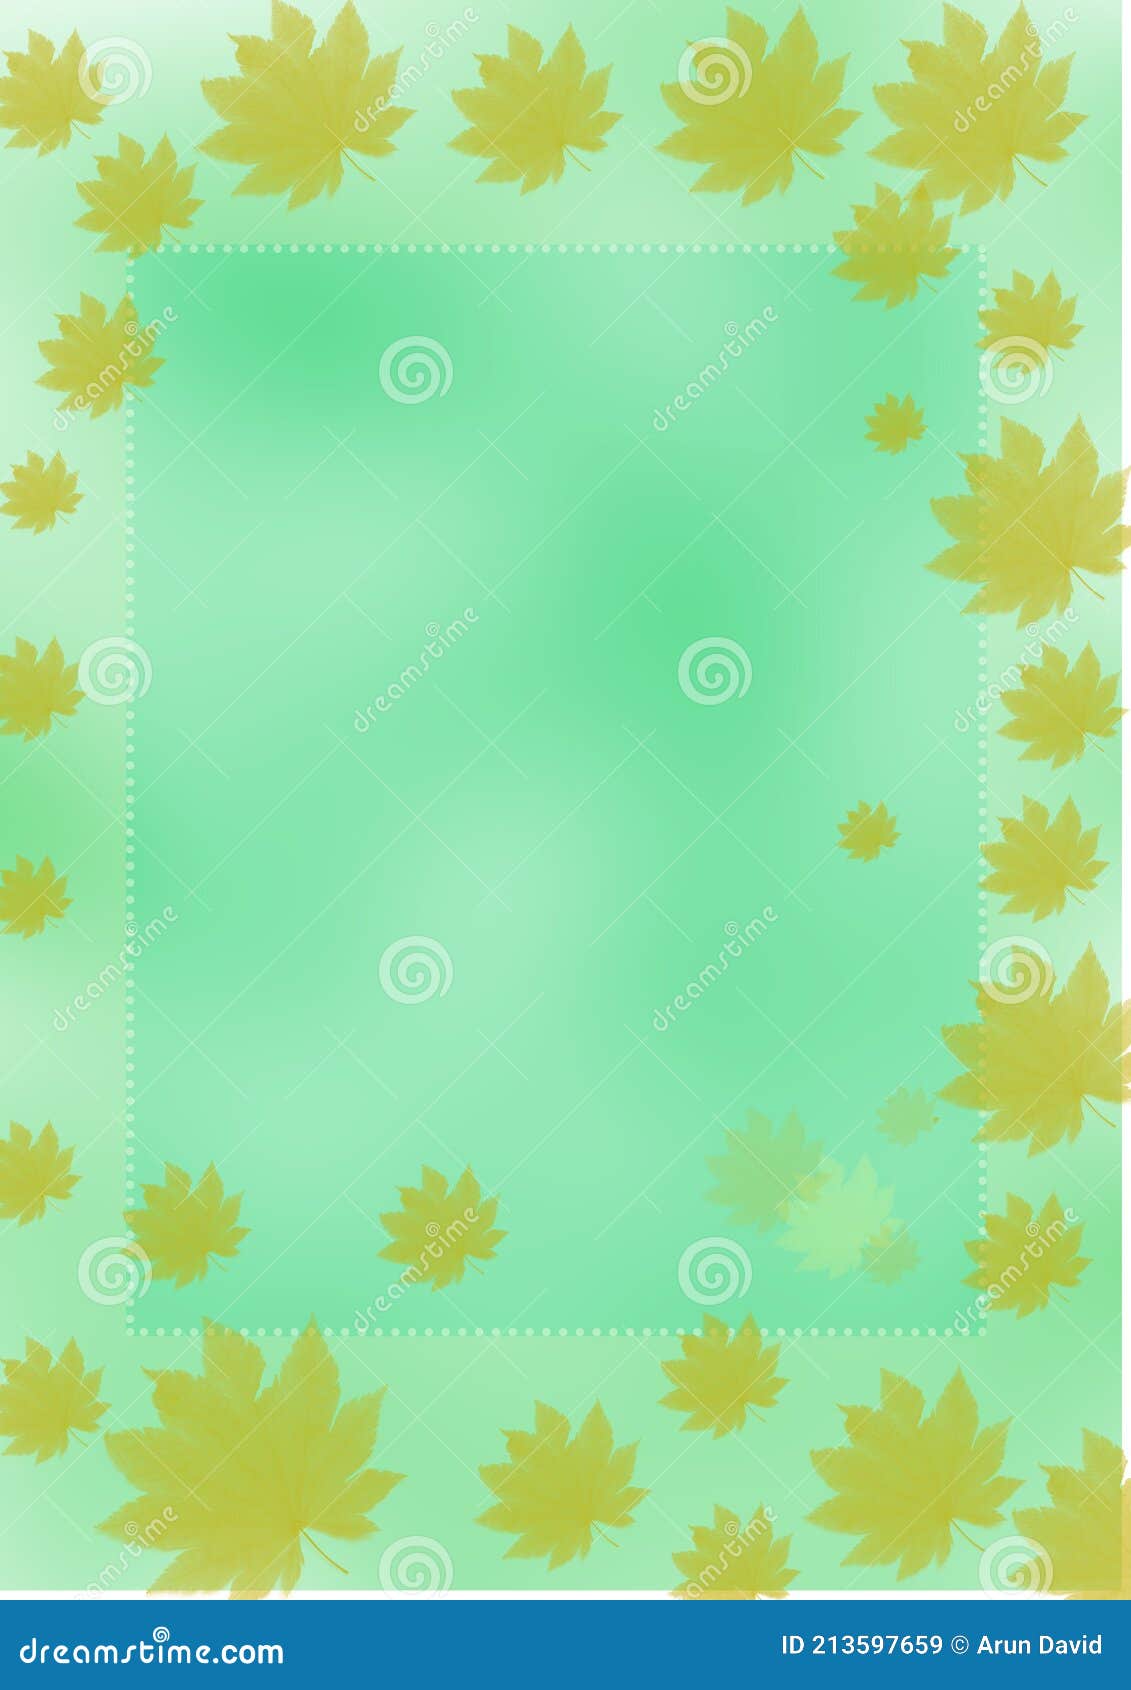 Quotes Background with Yellow Flower and Like Green Quotes Maker and Empty  Space Stock Illustration - Illustration of garden, blossom: 213597659